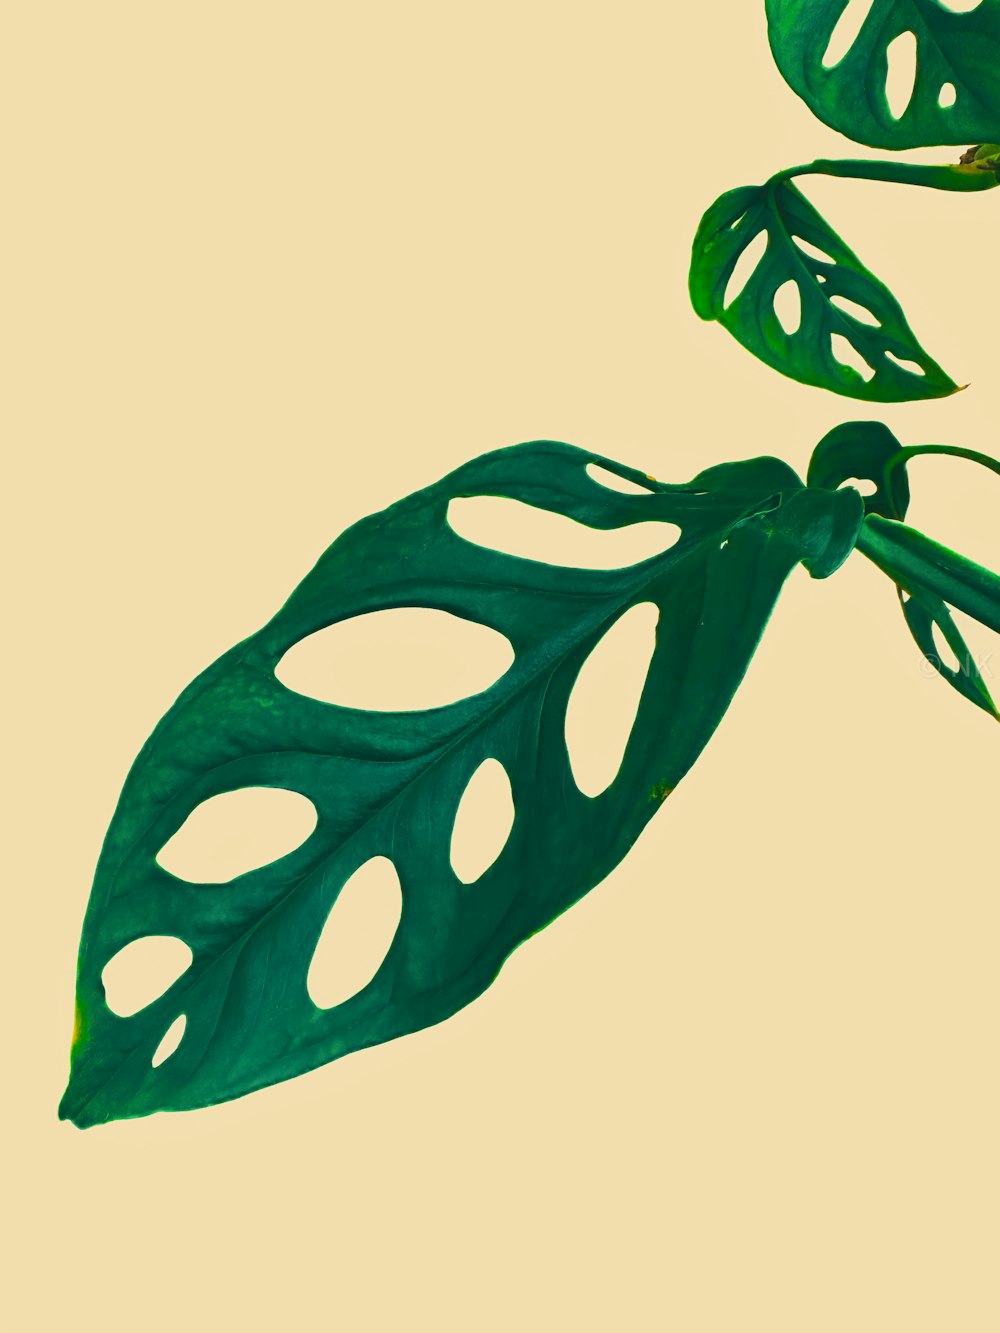 a green plant with two leaves on a yellow background